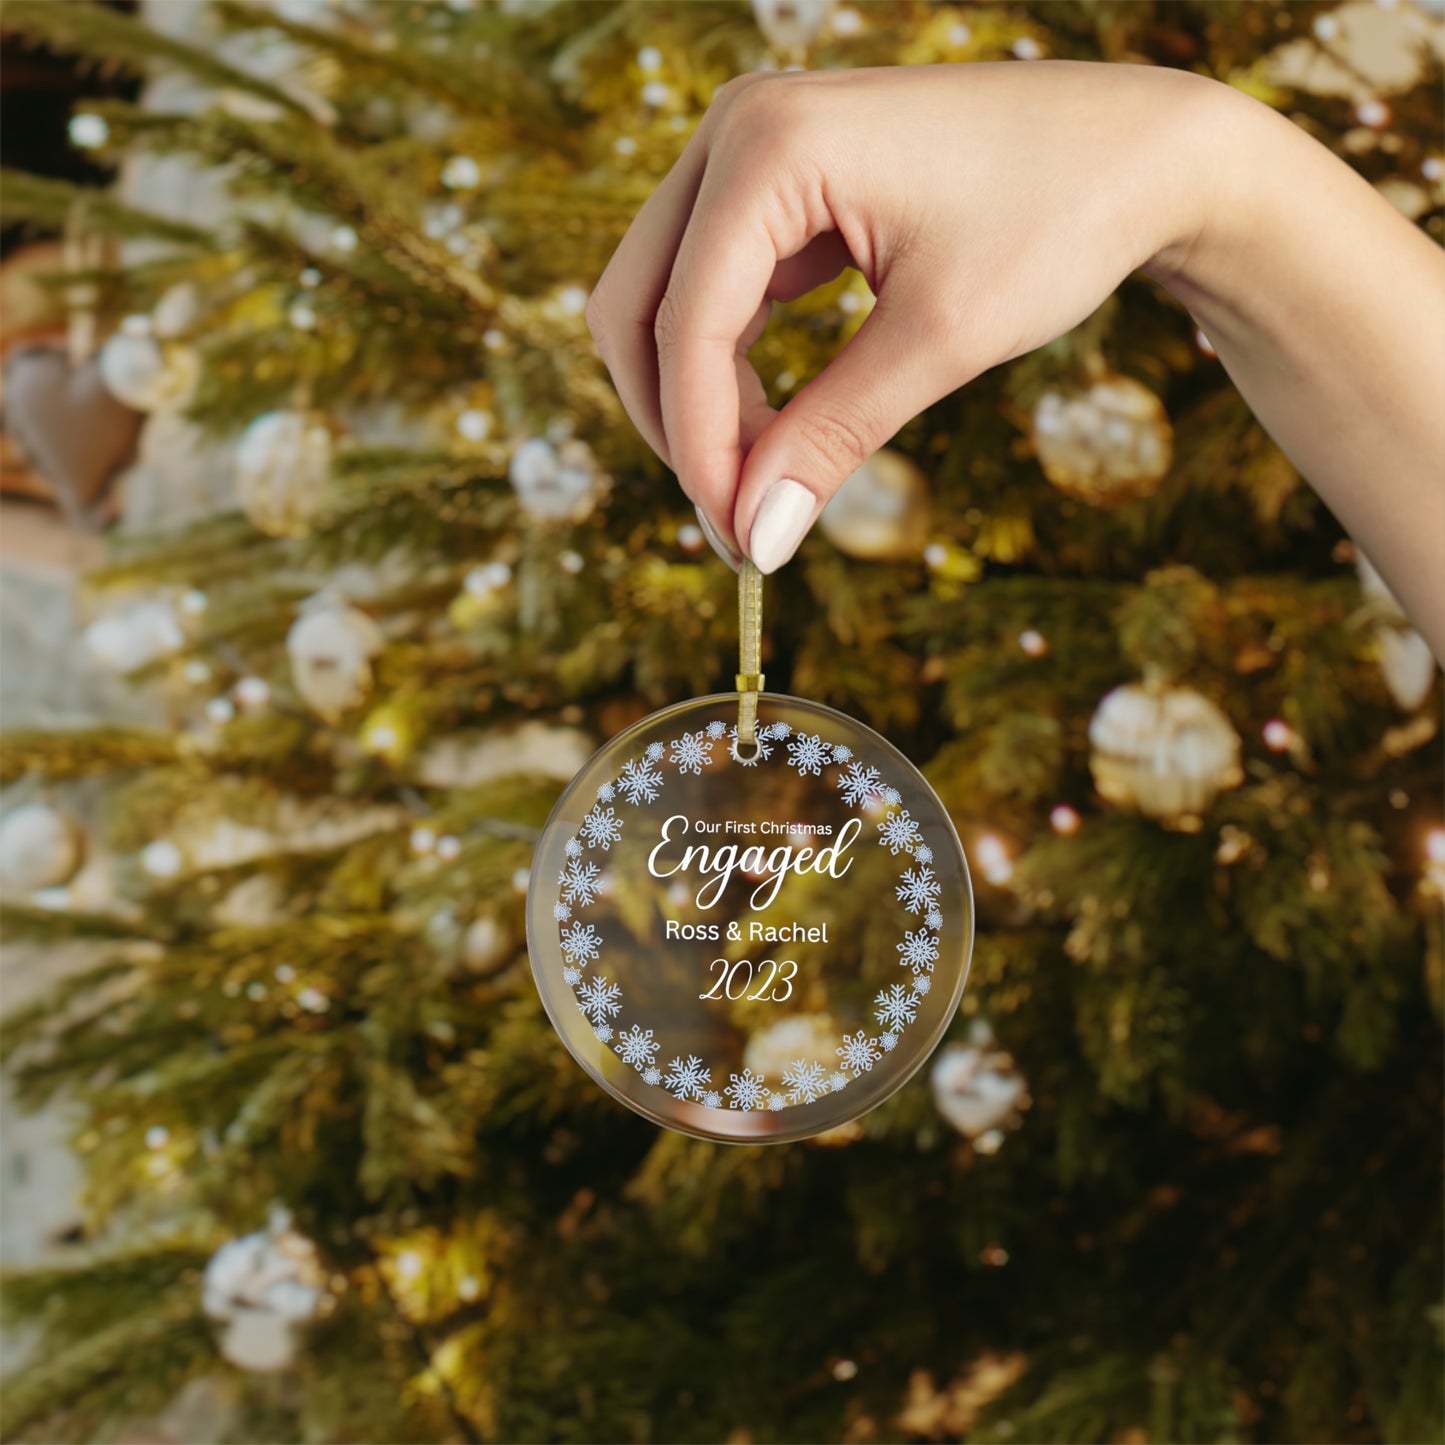 Our First Christmas Engaged - Glass Ornament To Commemorate Your Engagement, Engagement Ornament Gift